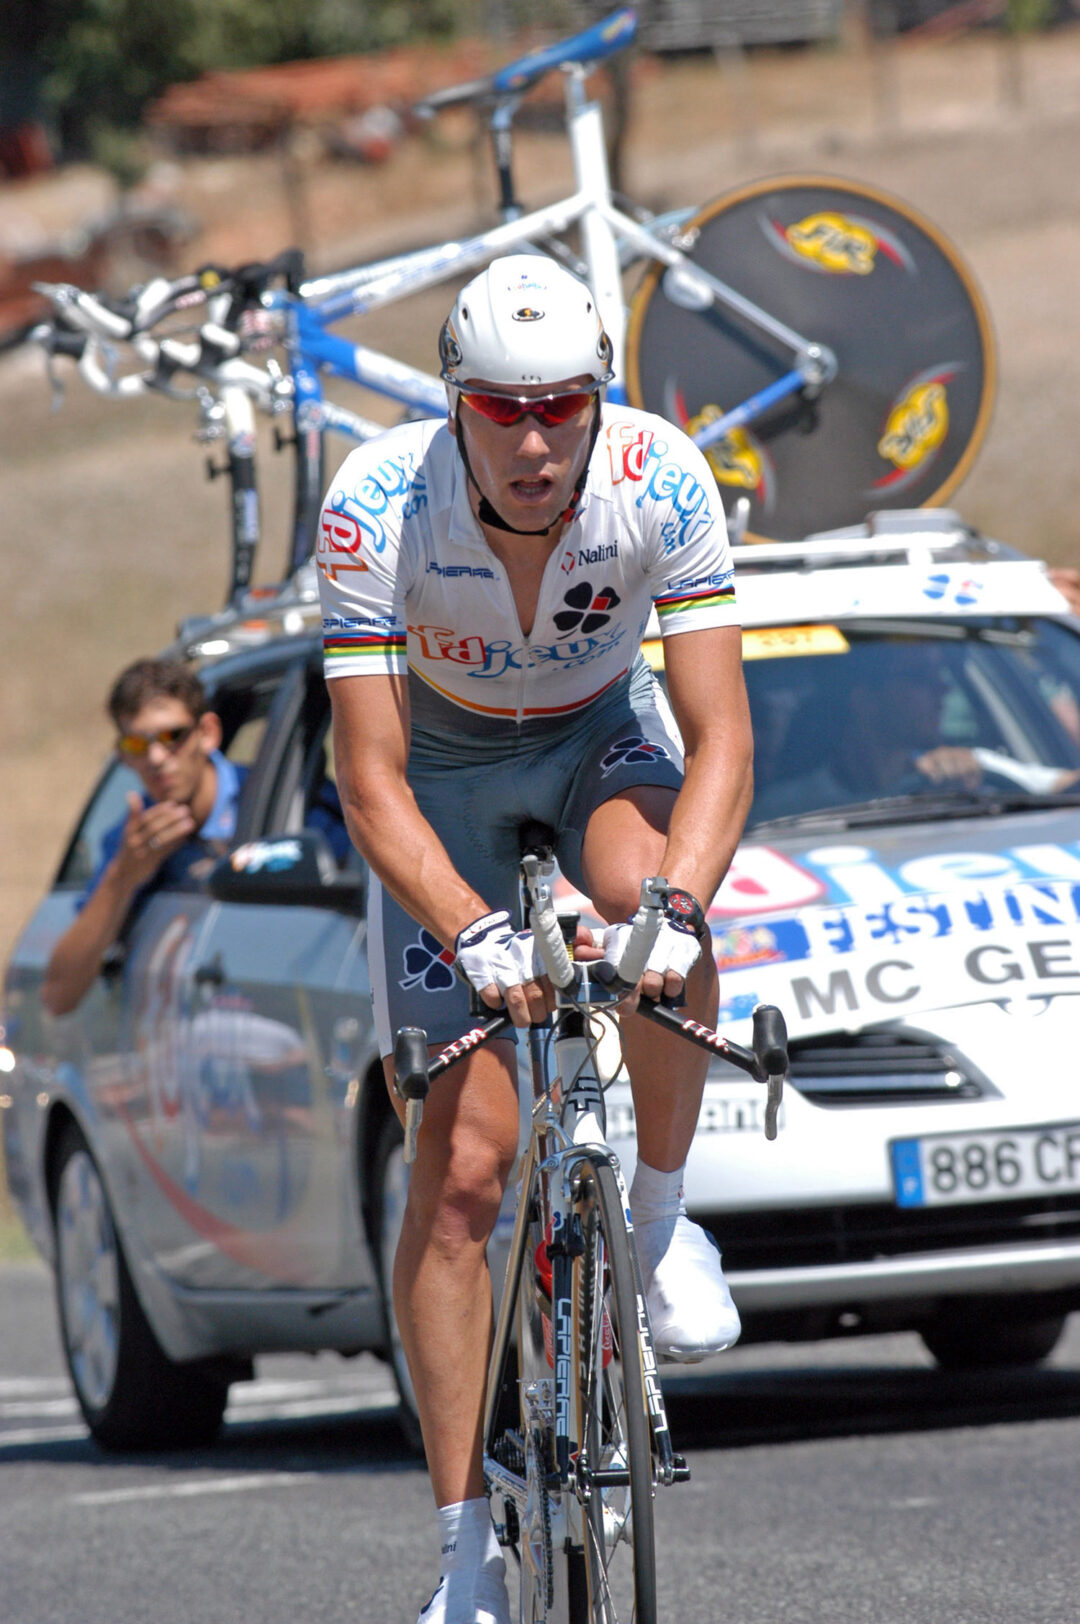 TDF Flashback (2003): McGee remembers his prologue win in Paris - Ride ...